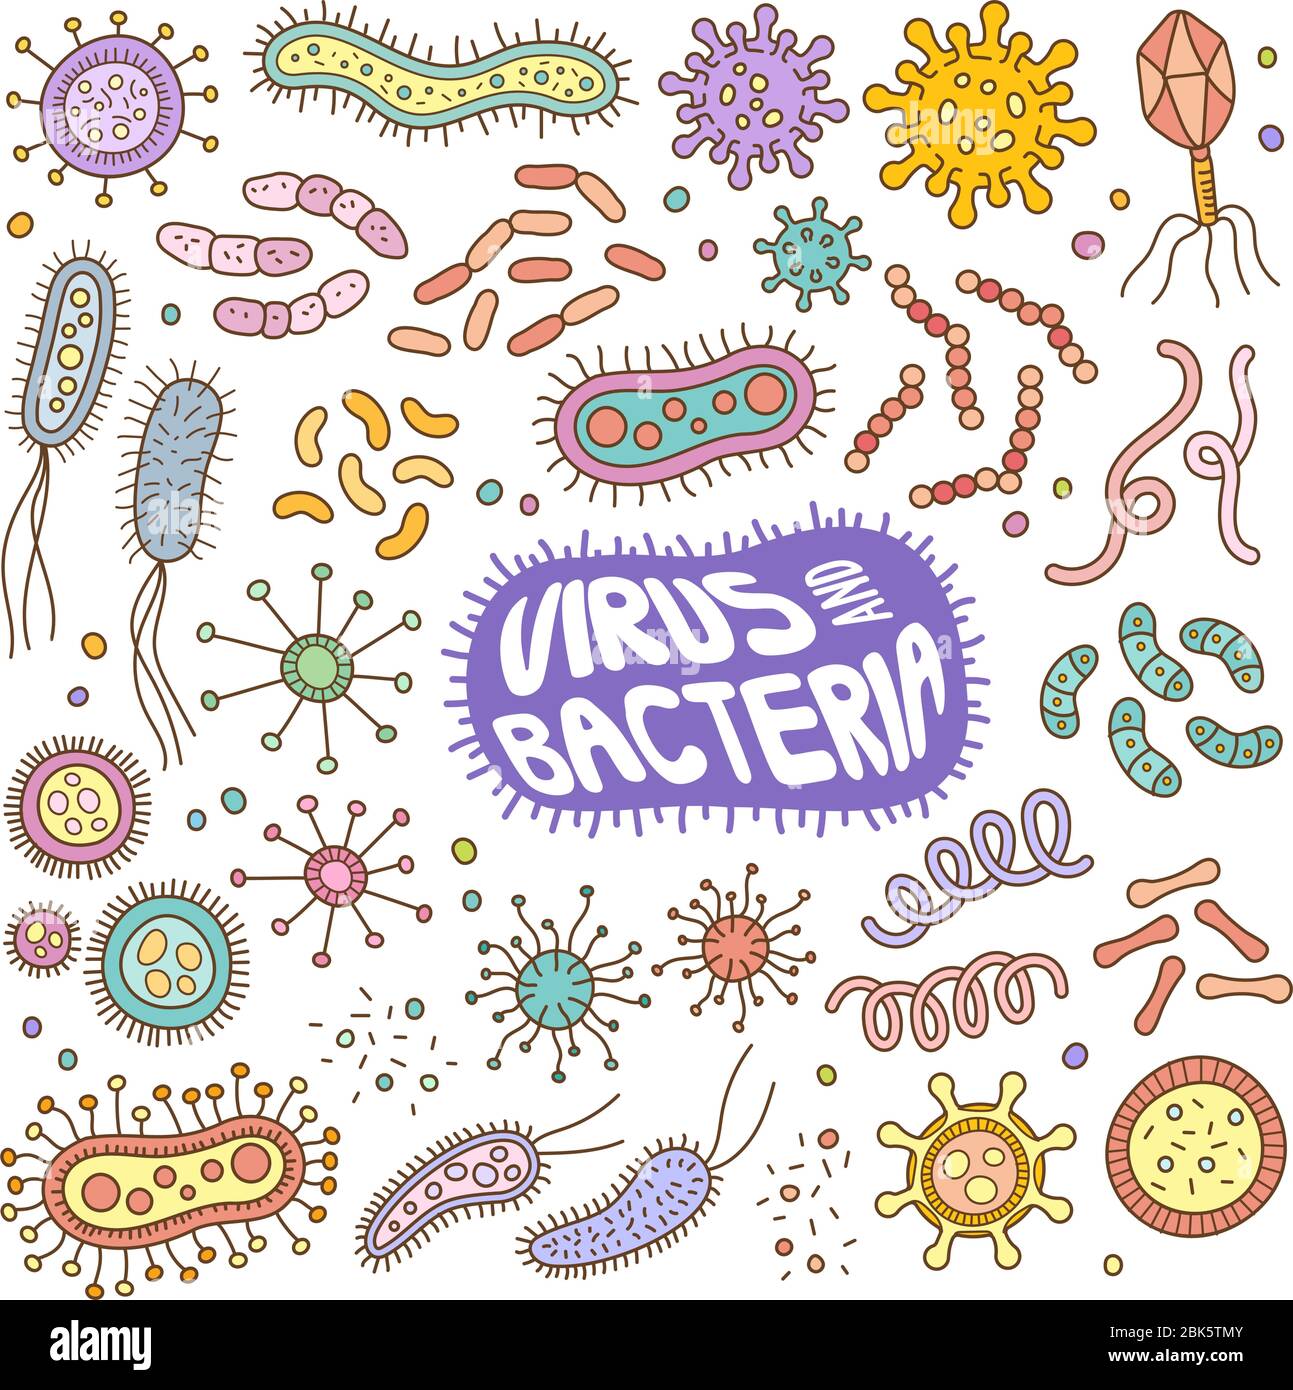 Set of virus and bacteria vector cartoon illustration elements. Various objects of hand-drawn virus and bacteria in doodle color. Stock Vector